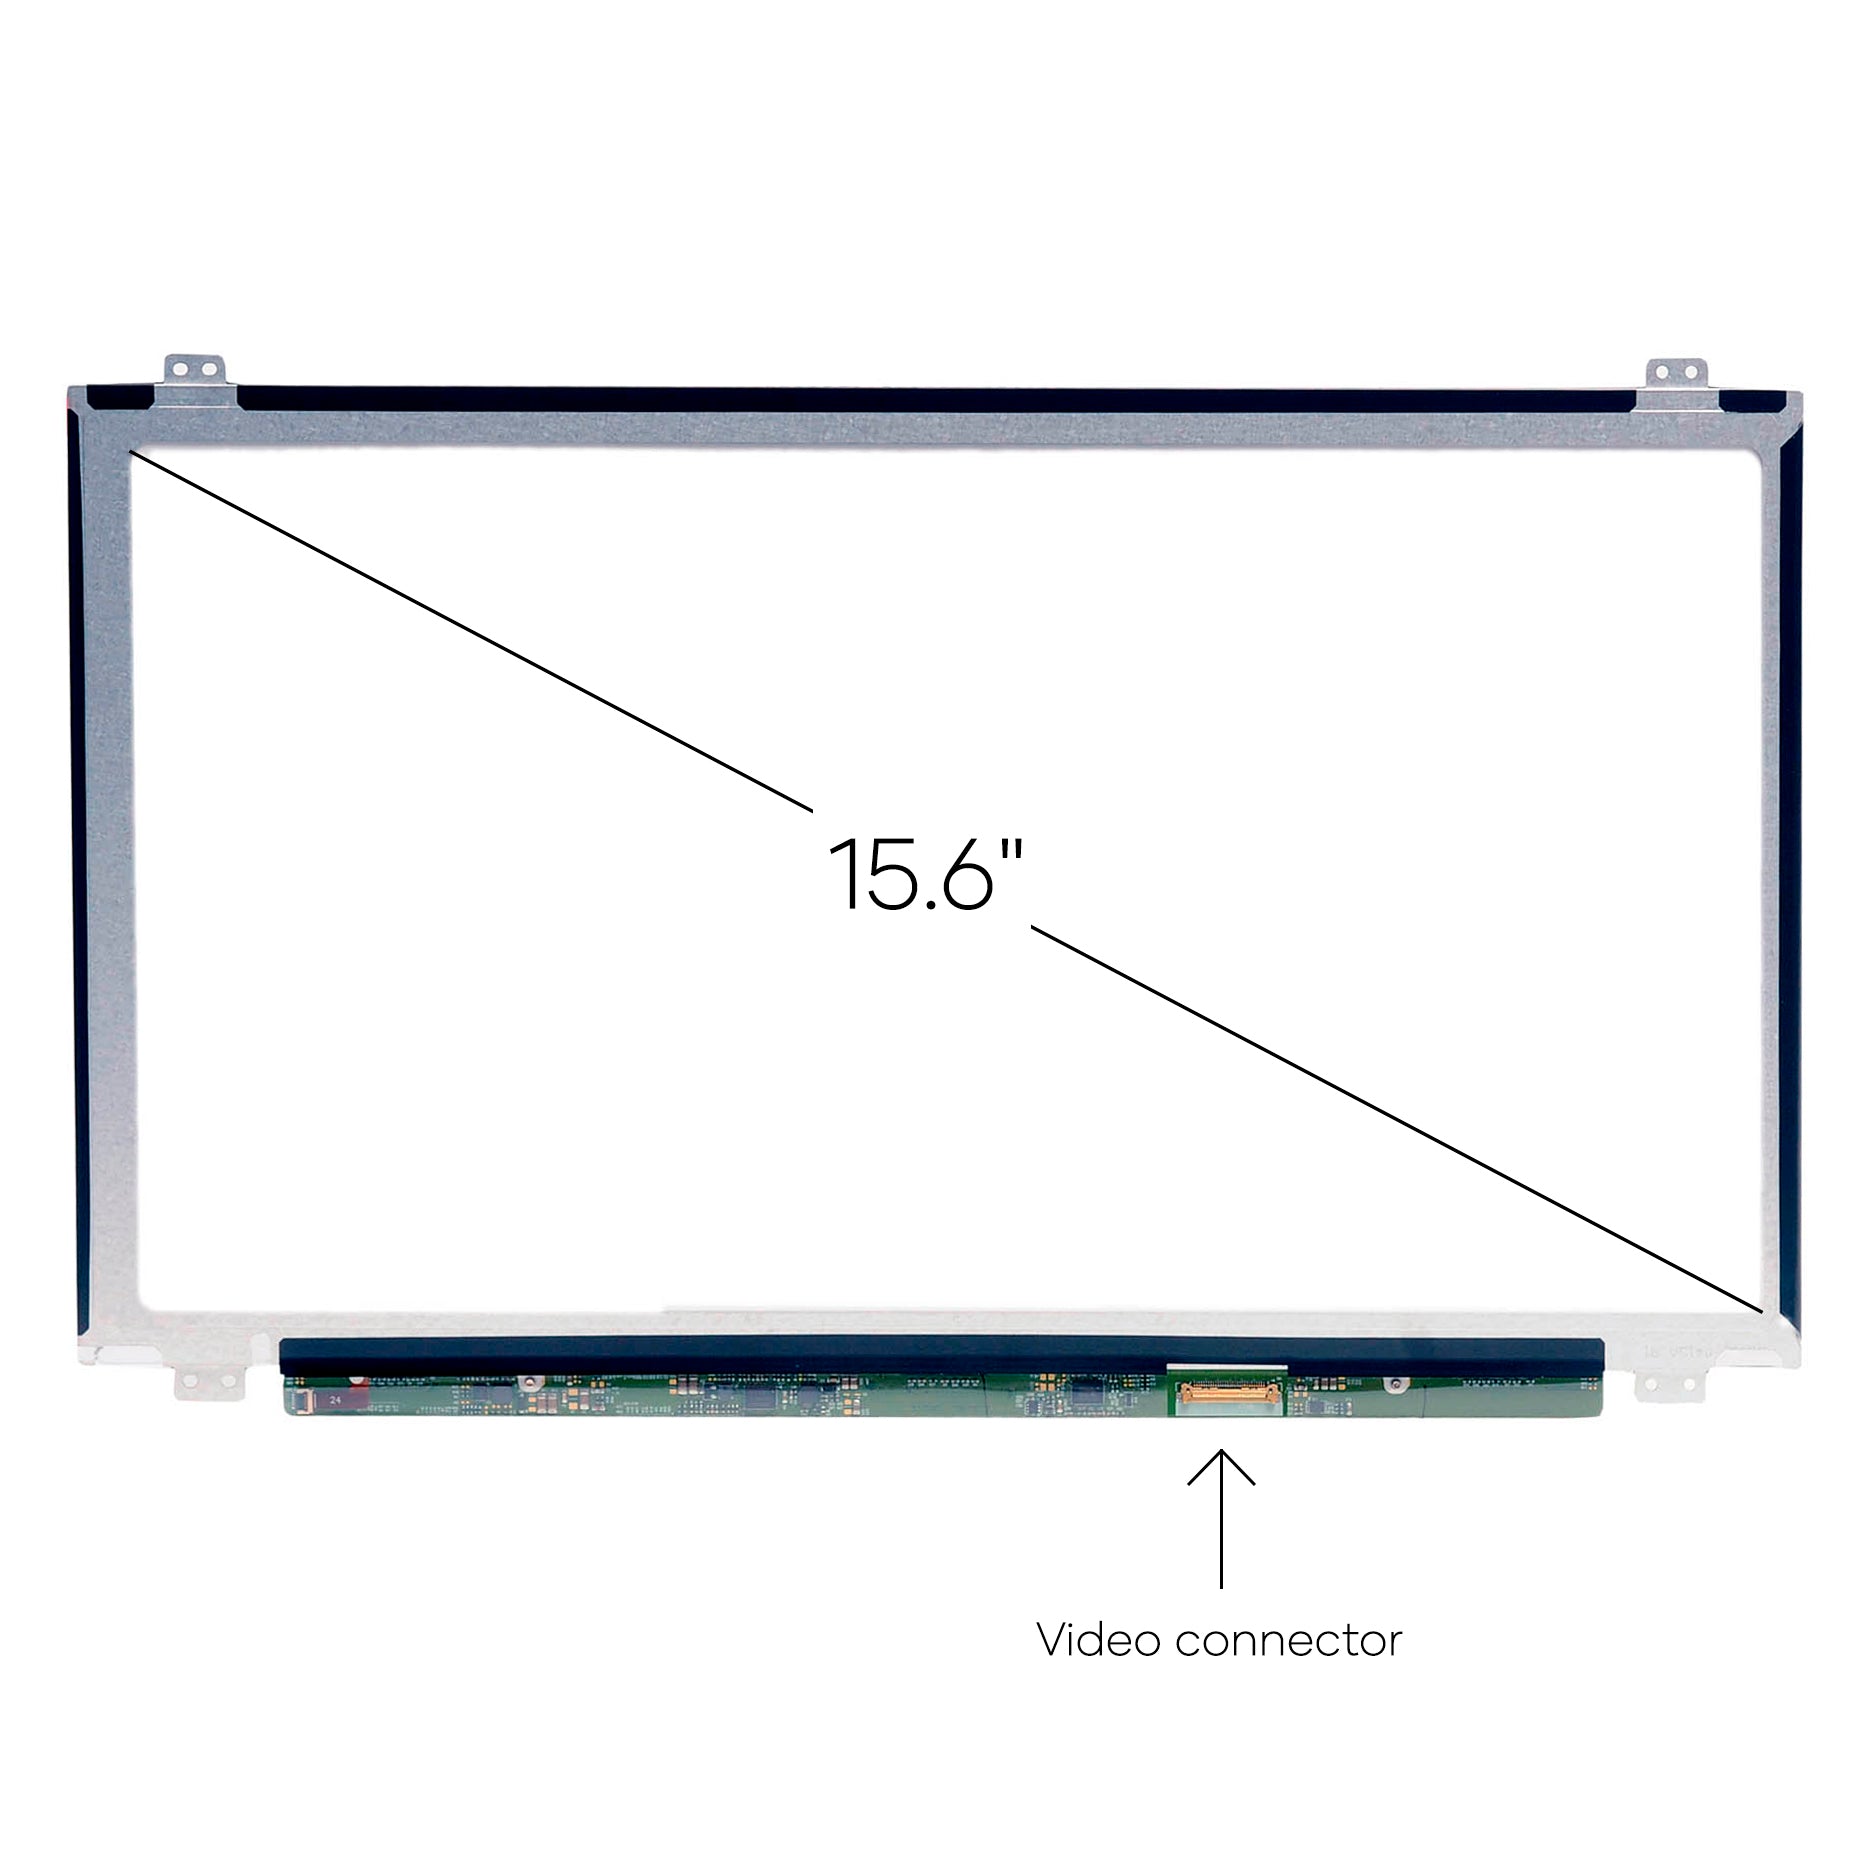 LCDBros Screen Replacement for NV156FHM-N42 FHD 1920x1080 IPS Matte LCD Display